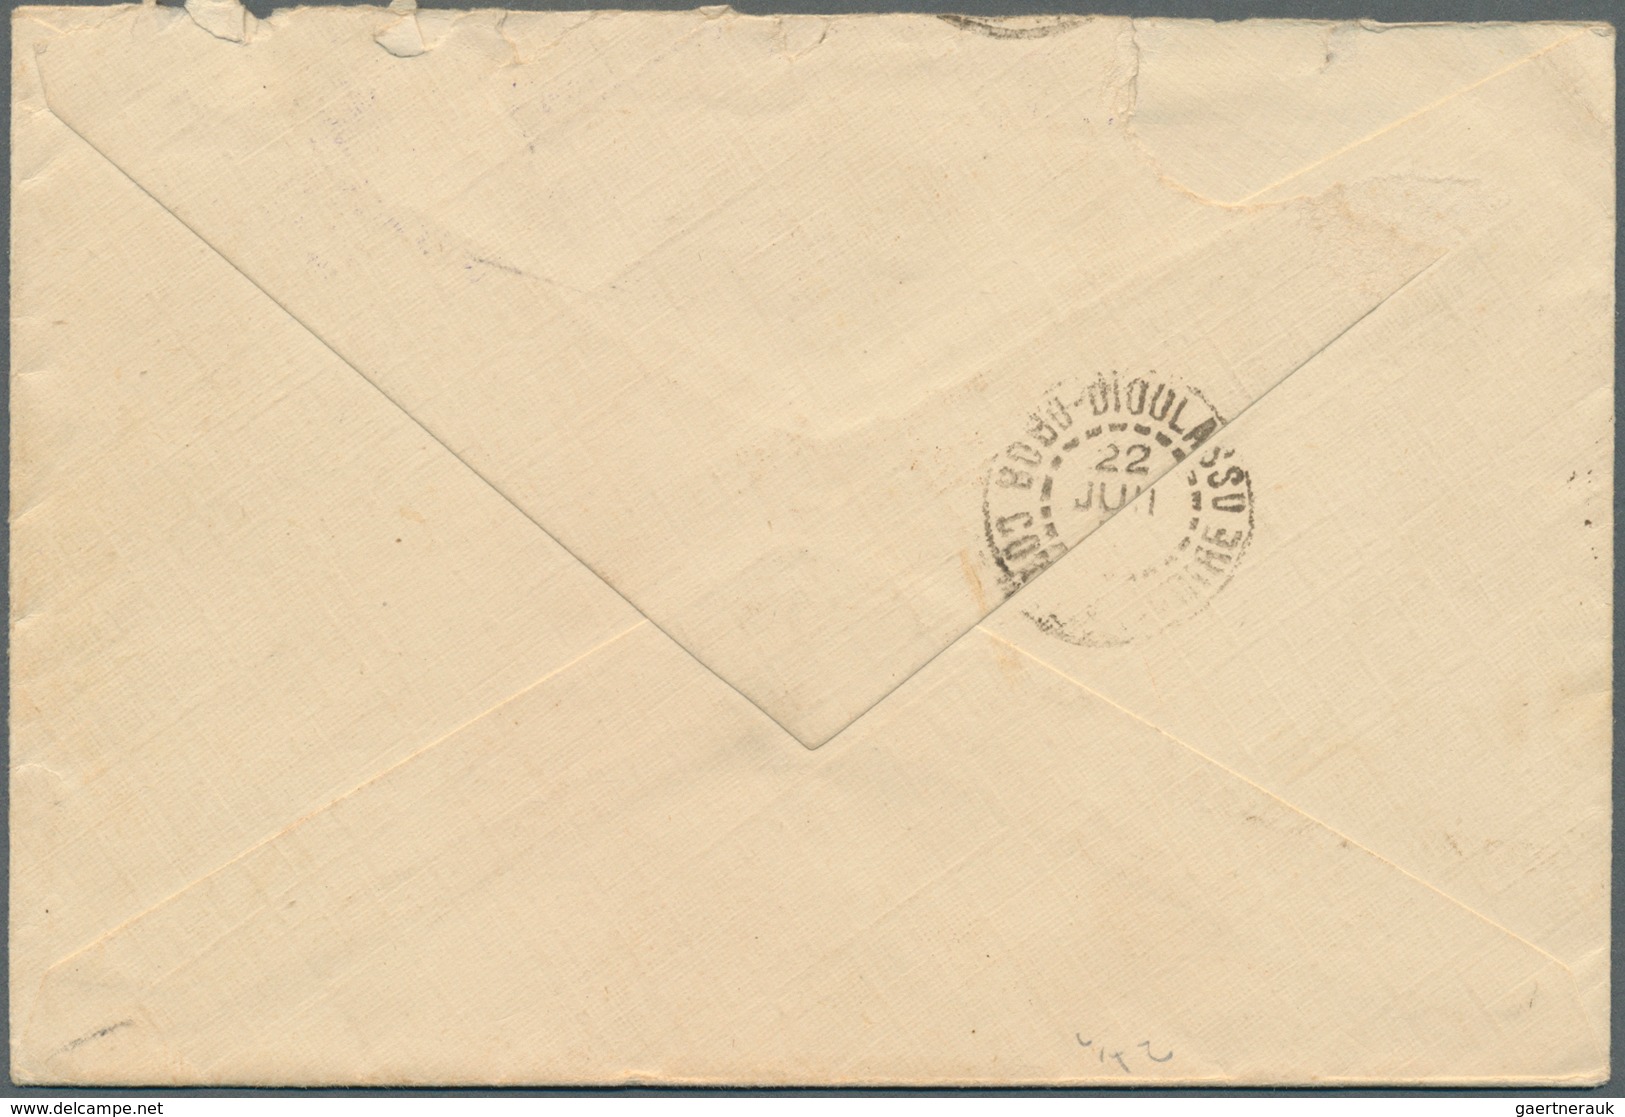 Frankreich - Militärpost / Feldpost: 1938. Military Mail Envelope Dated '13 Juin 1938' Addressed To - Timbres De Franchise Militaire